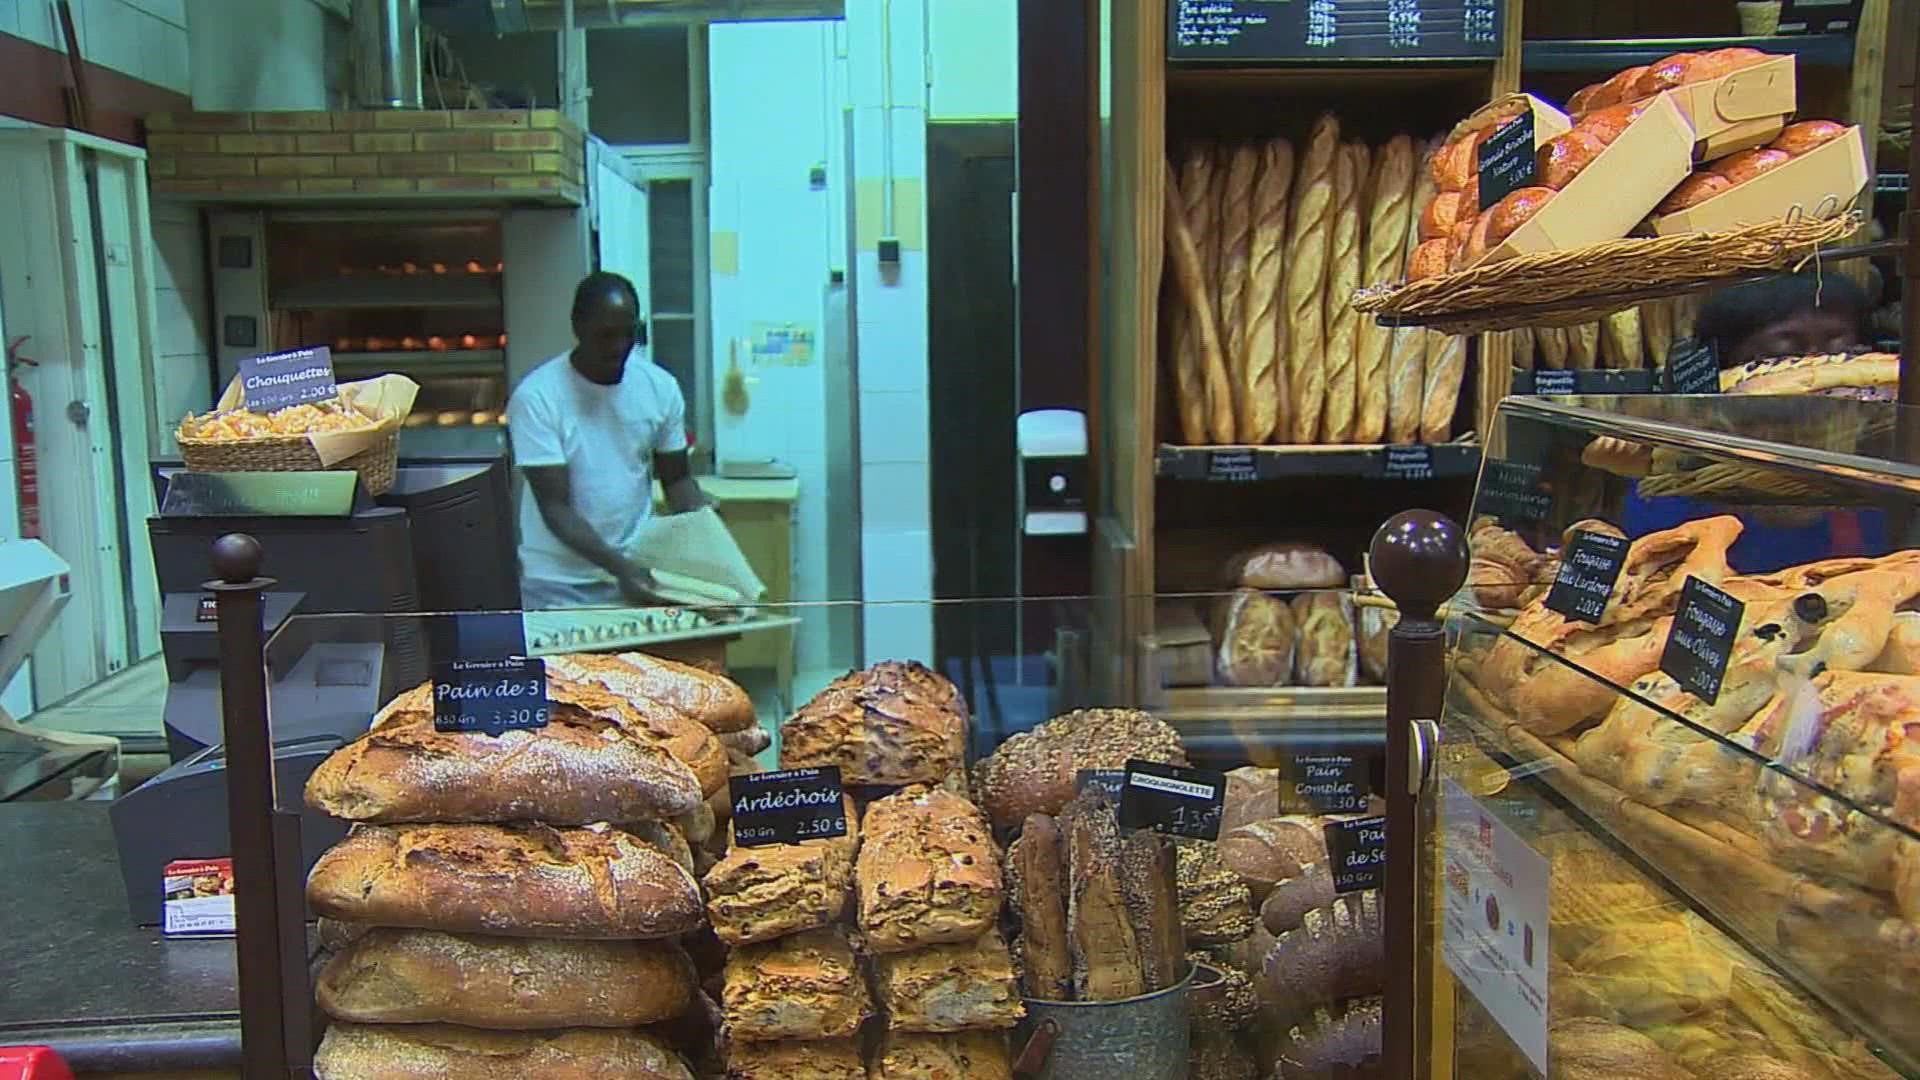 CNN says the "culture of the baguette" is now officially recognized on the UNESCO's list of Intangible Cultural Heritage.